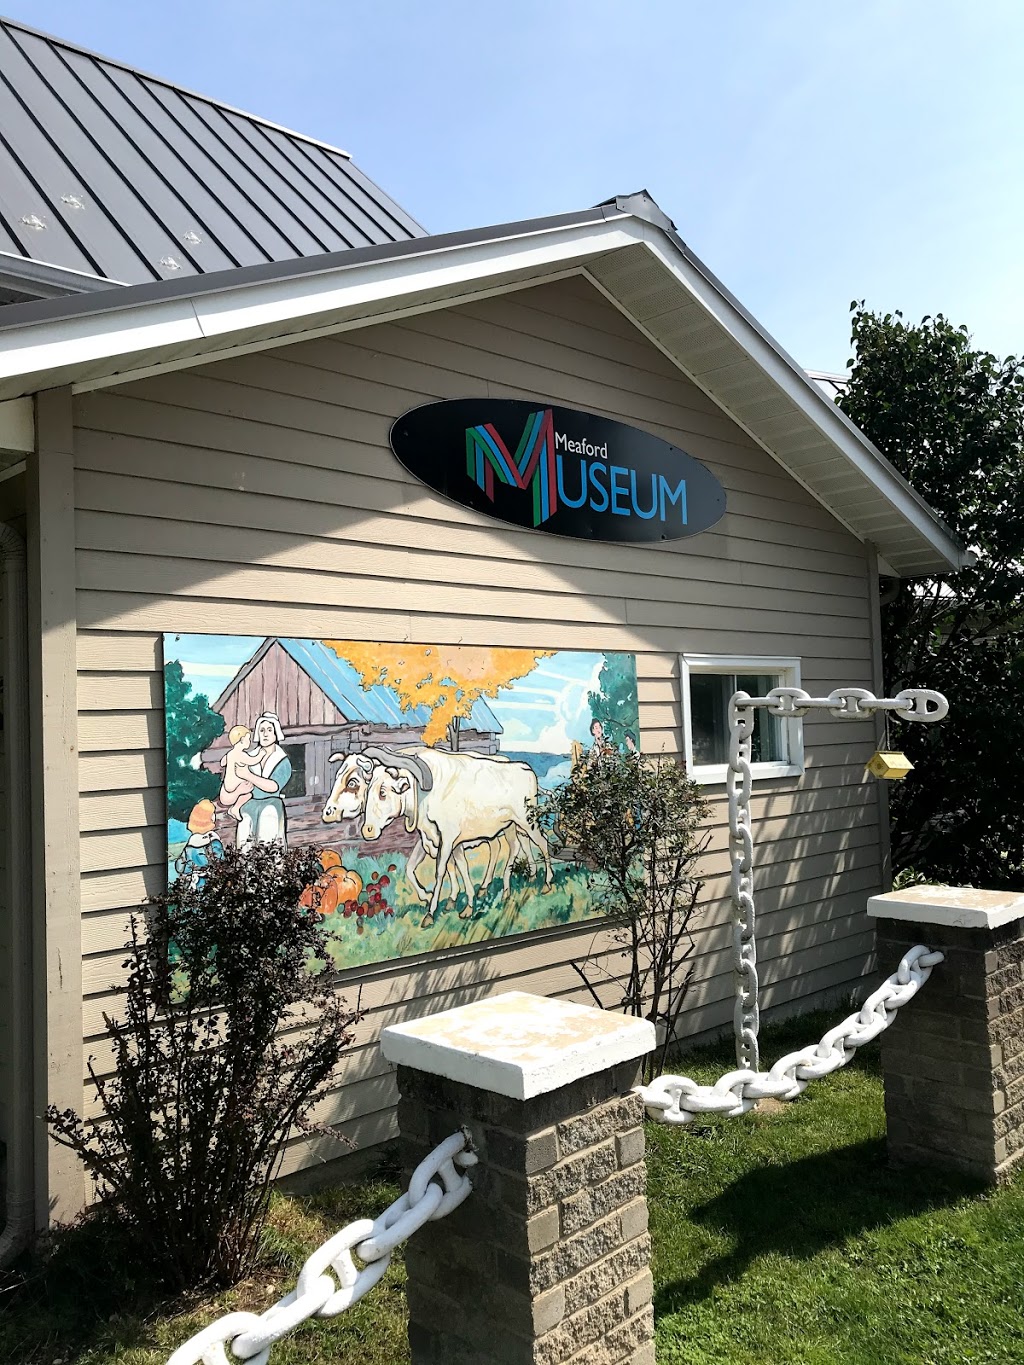 Meaford Museum | 111 Bayfield St, Meaford, ON N4L 1N4, Canada | Phone: (519) 538-5974